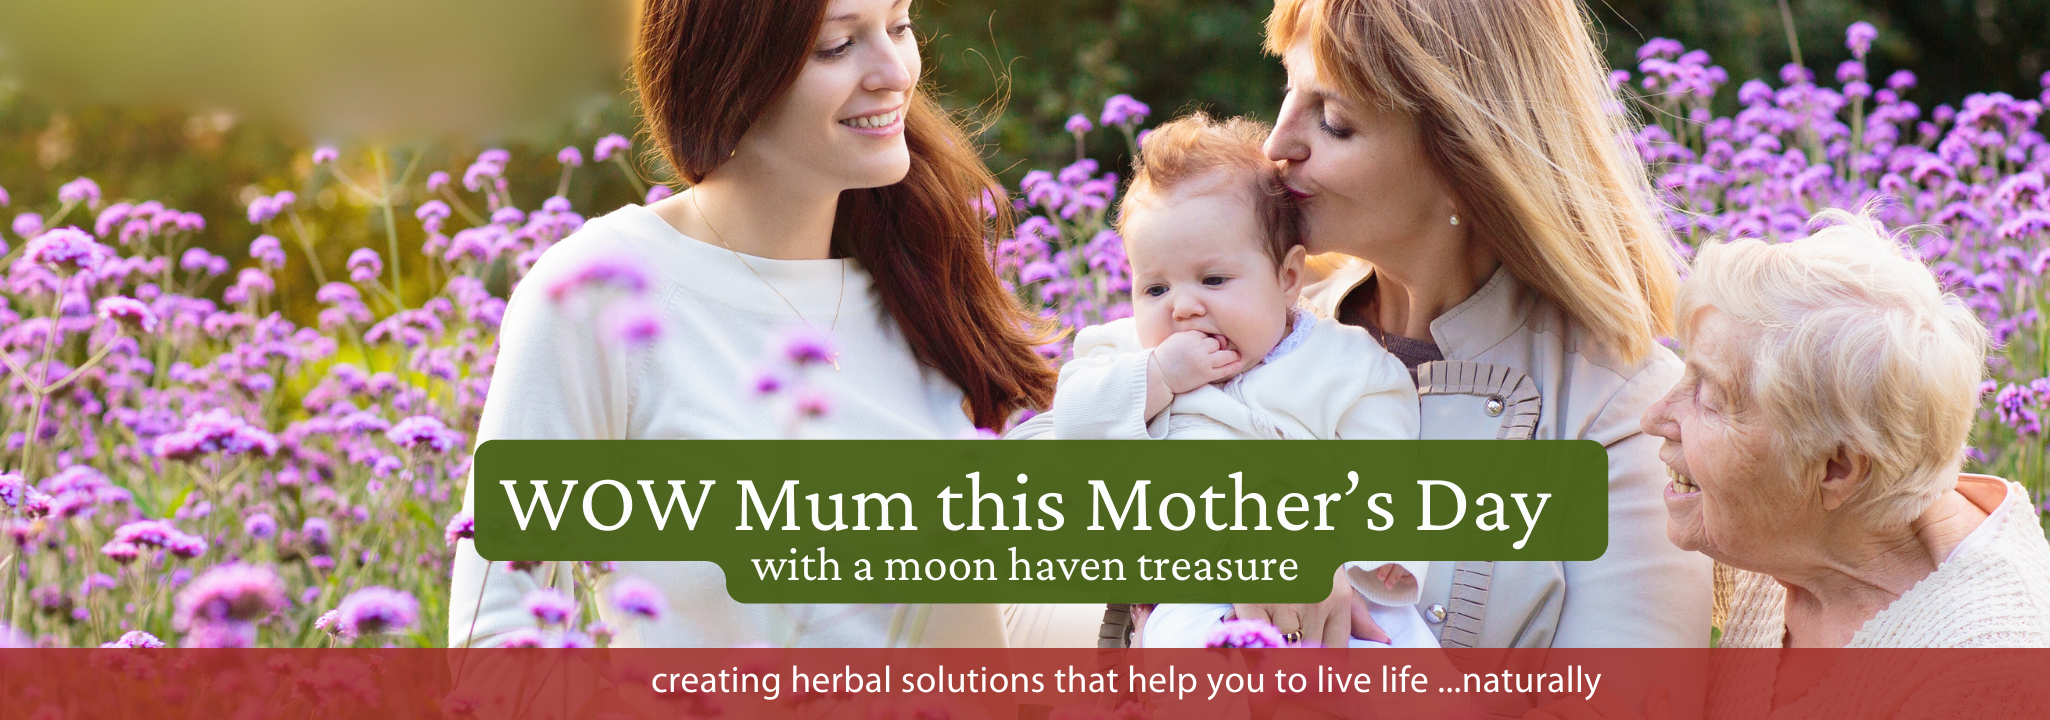 Moon Haven Mothers Day Collection